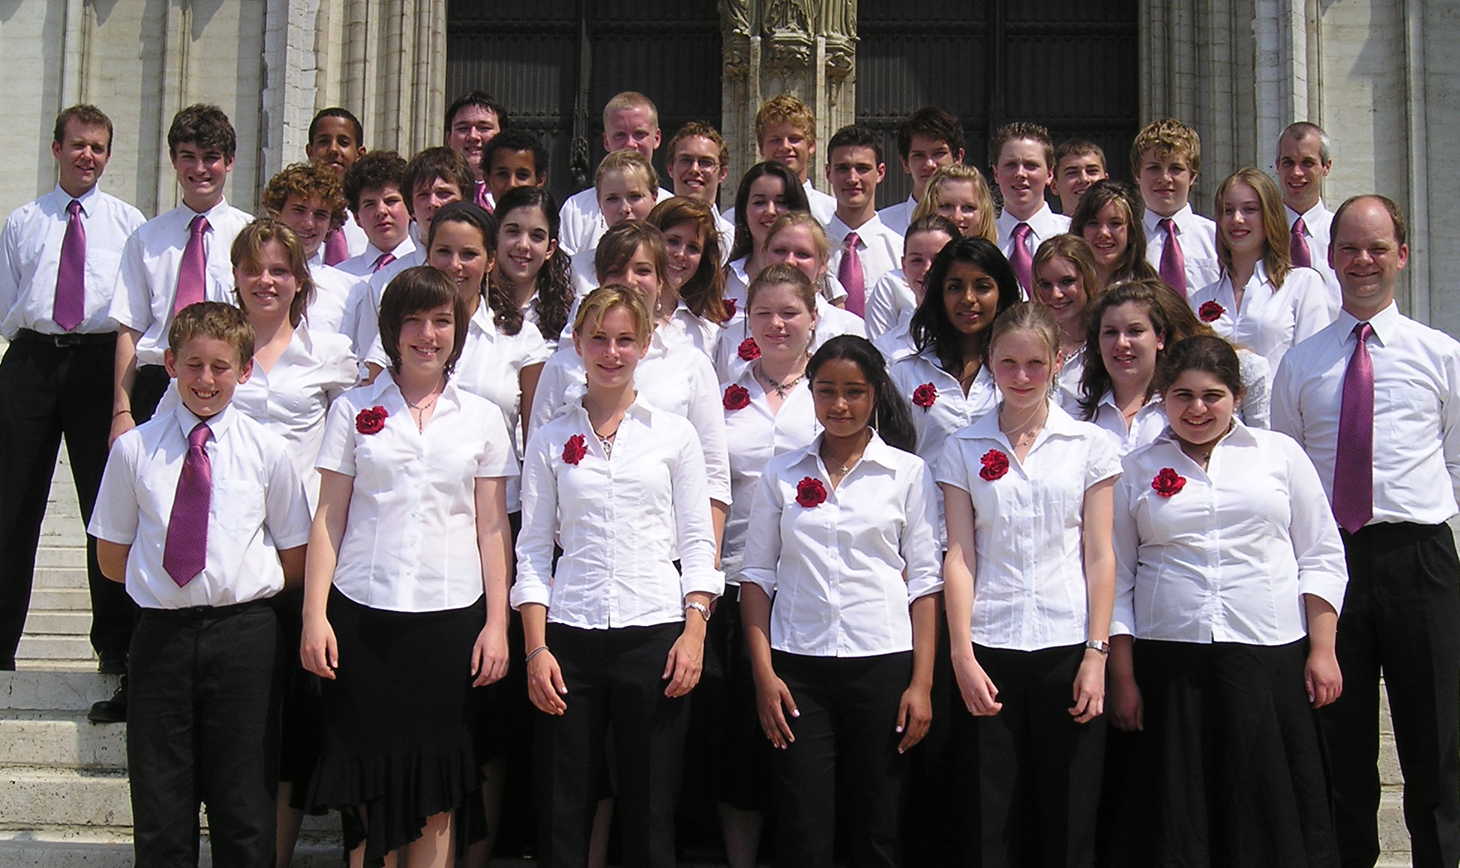 Ah, the 2006 Bruges Music Tour, when one of the company nearly burned down the oldest church in the city!